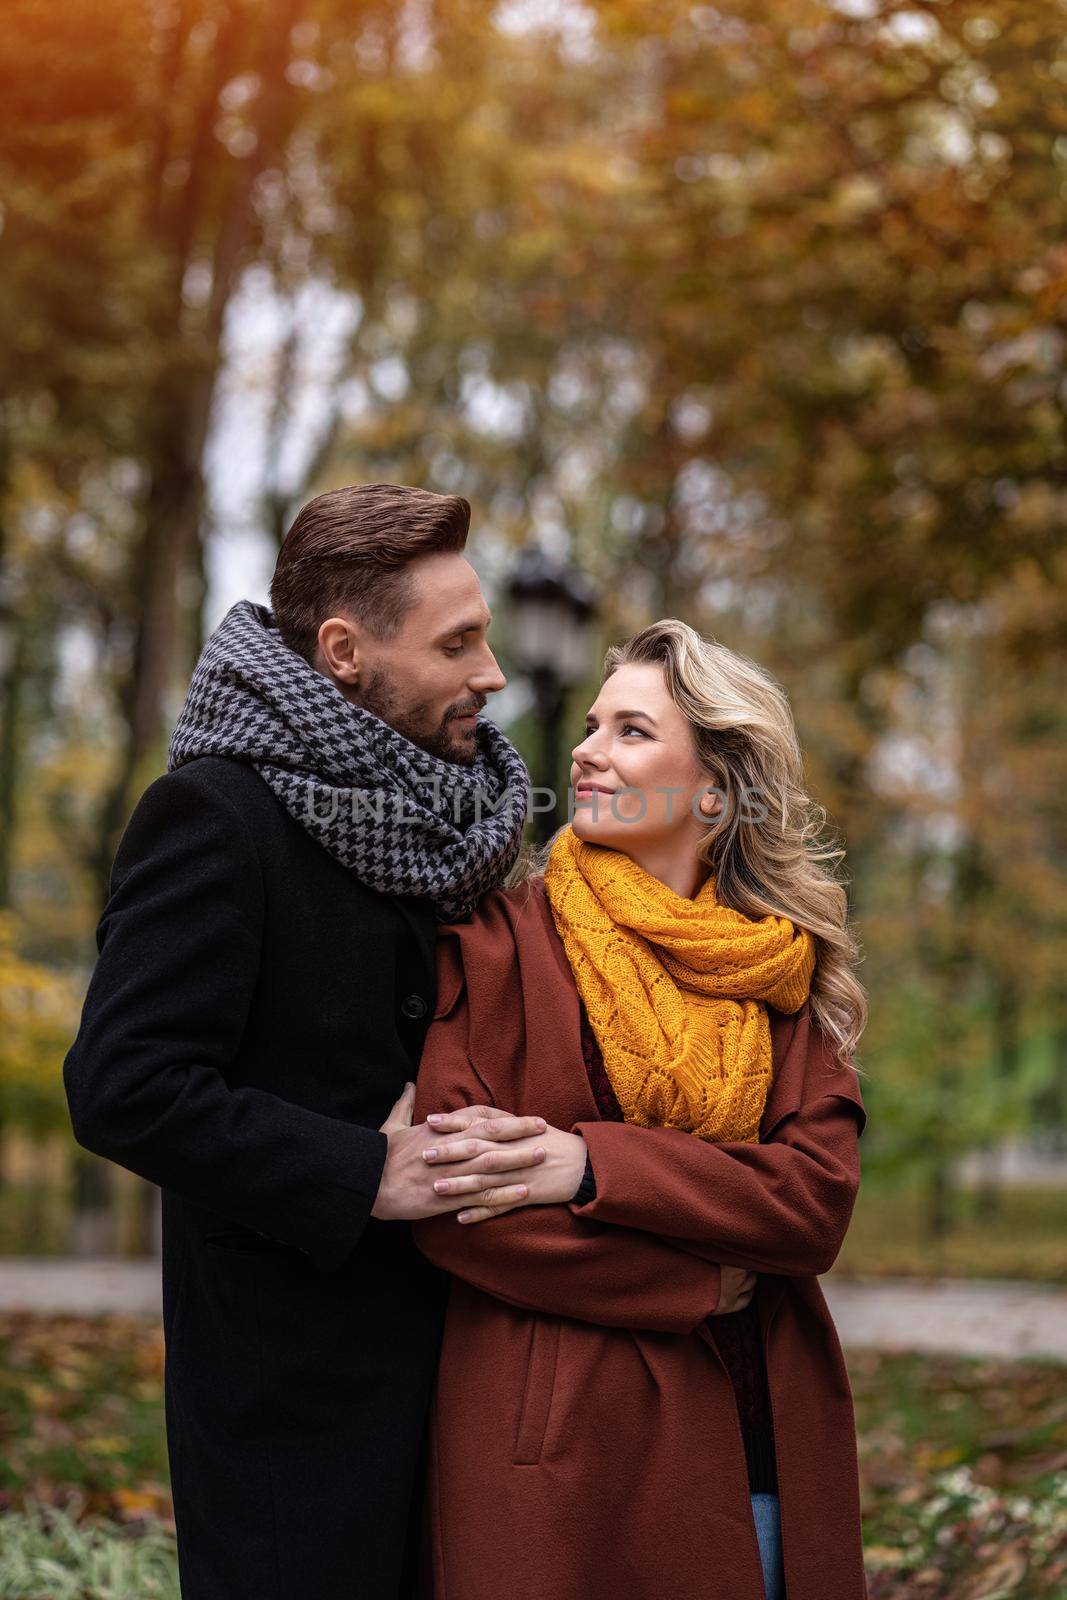 Handsome man and a woman hugged from behind smile looking at each other in the autumn park. Outdoor shot of a young couple in love having great time. Autumn toned image.